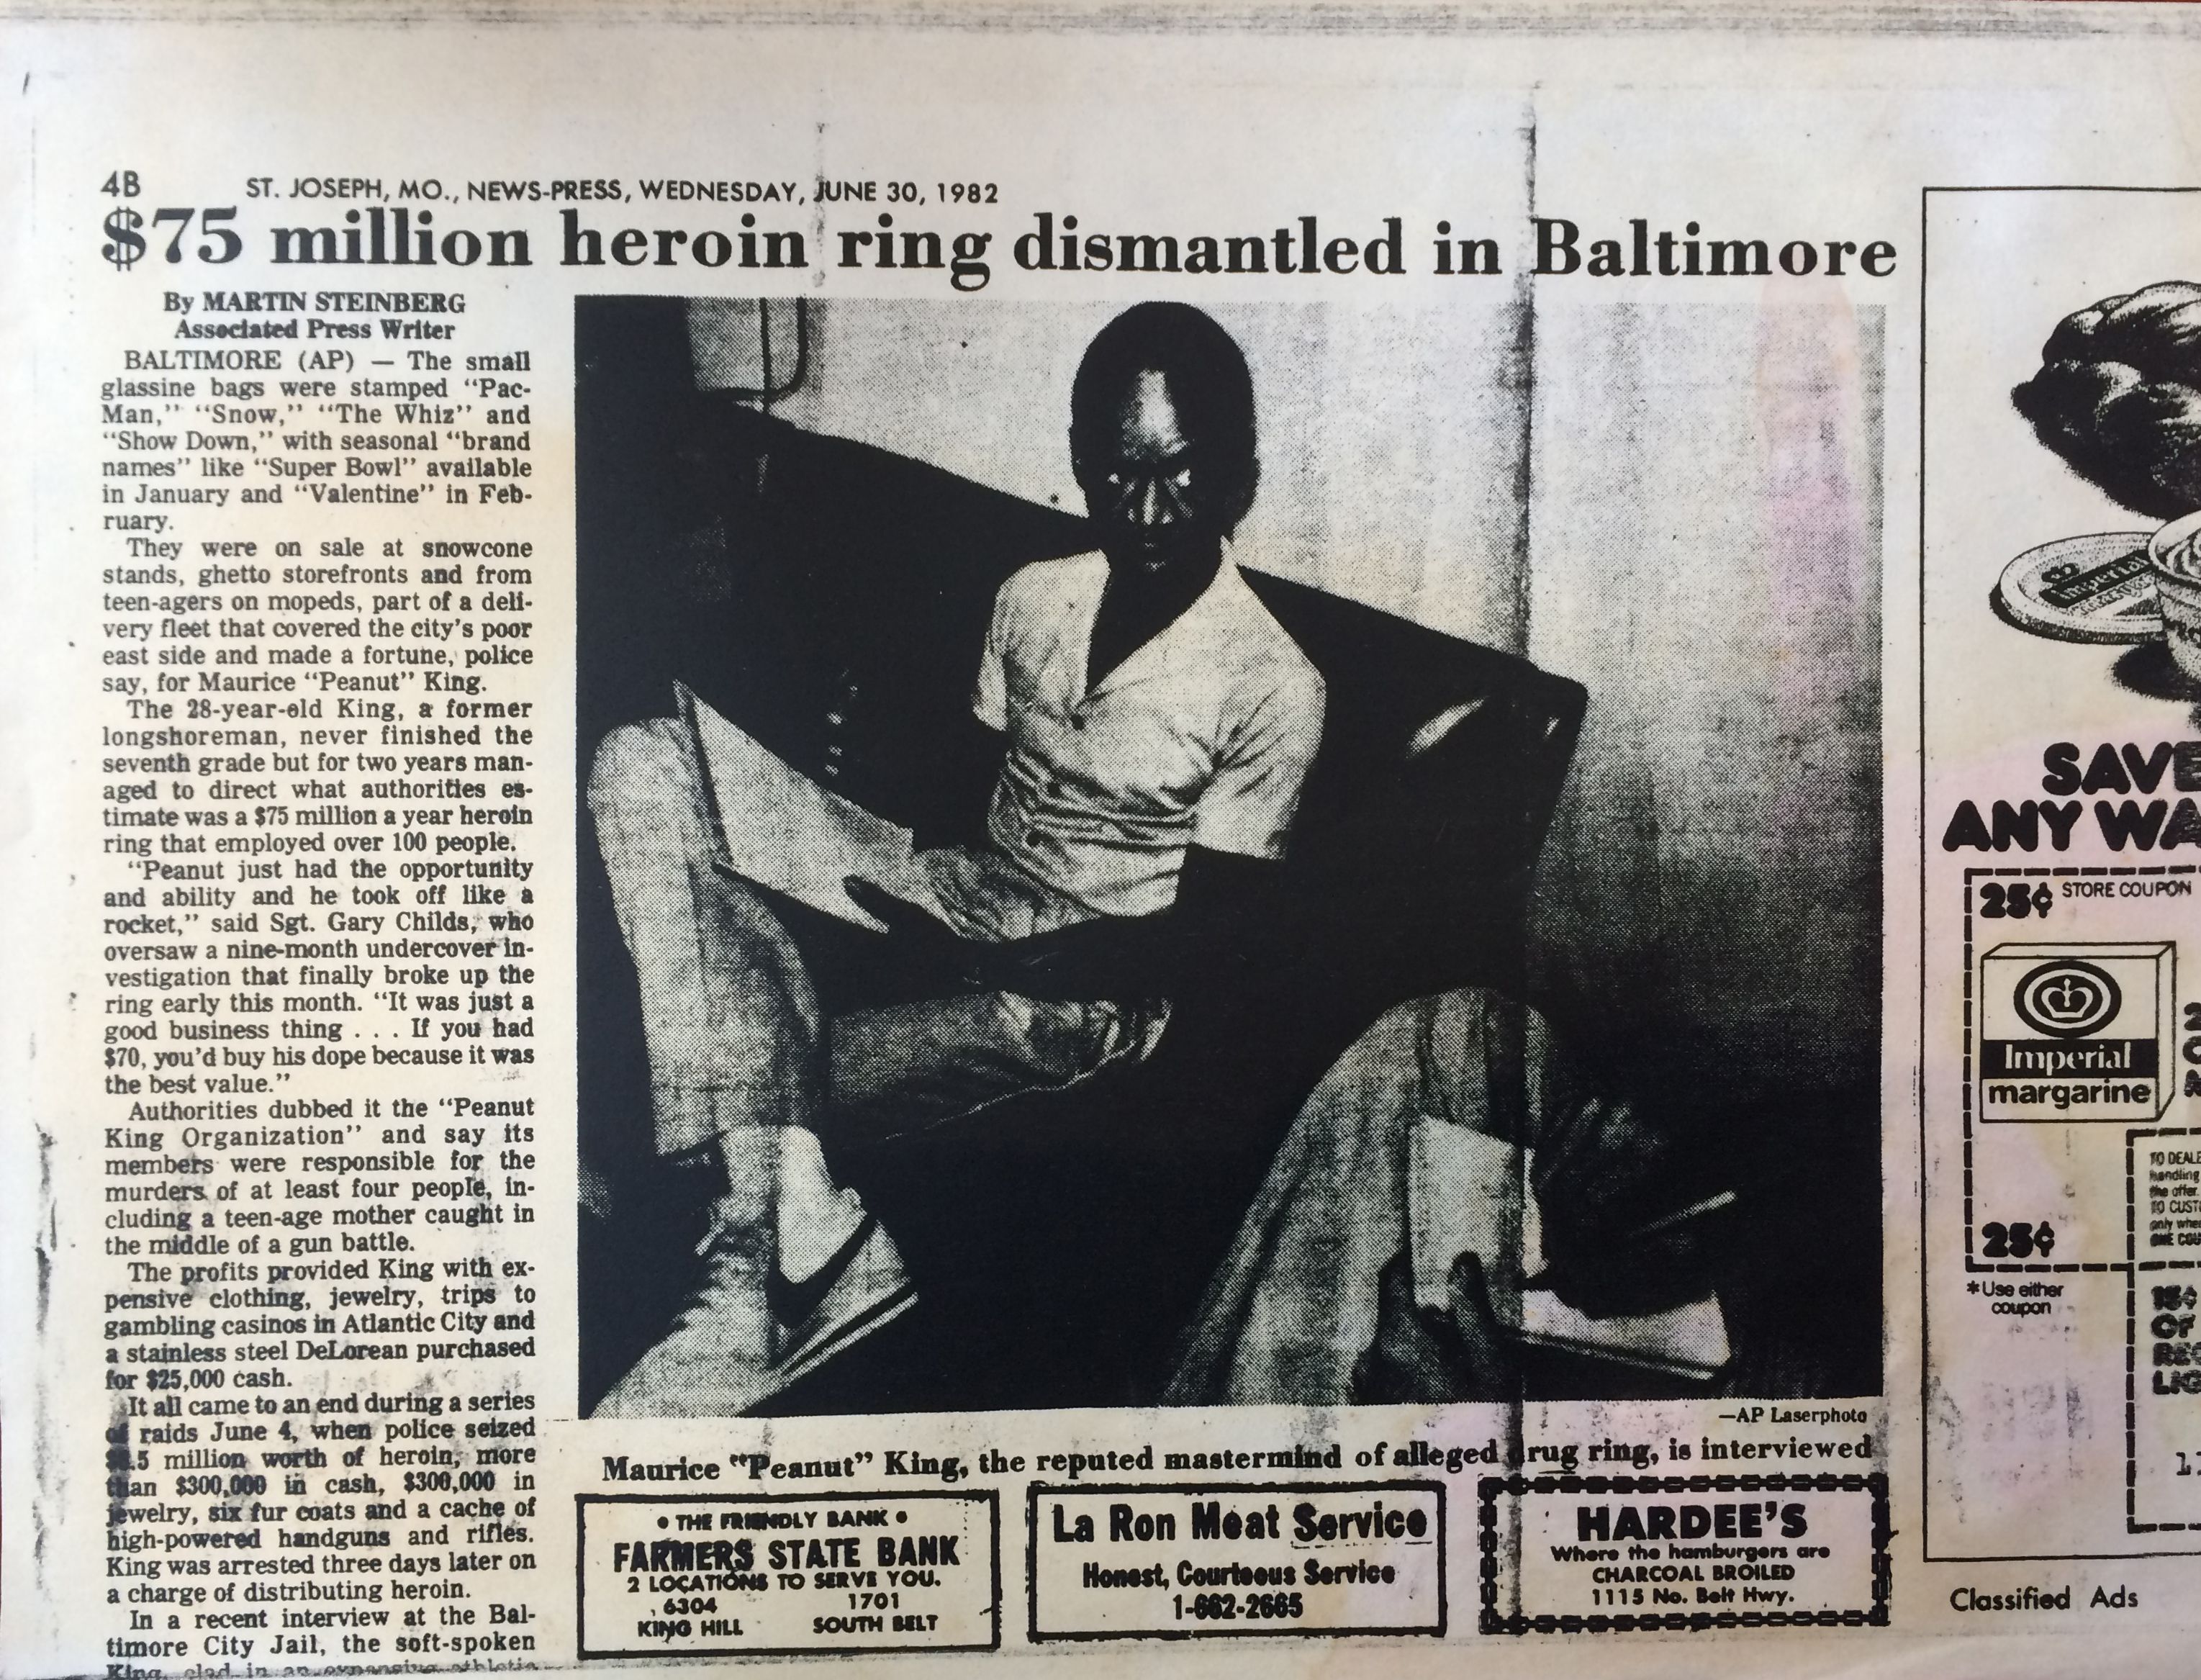 Peanut King: After 37 years in prison, a giant of Baltimore's drug trade  returns to face his city's ruins – Baltimore Sun